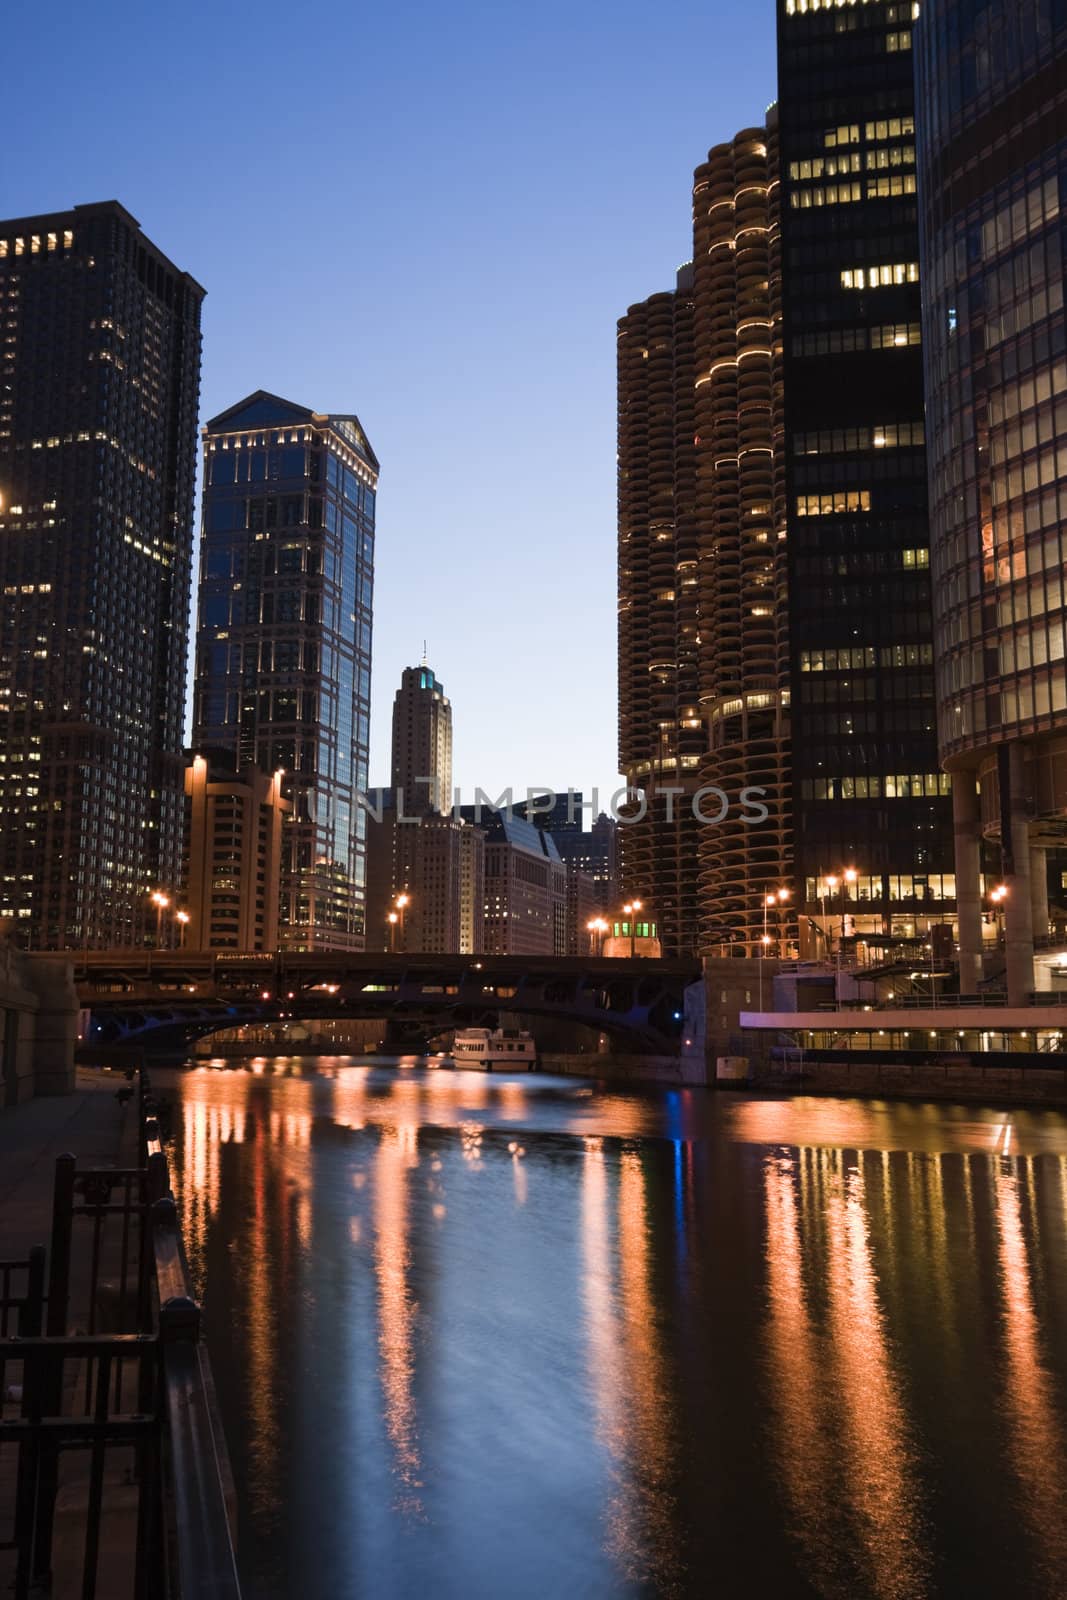 Chicago, Illinois from the river.